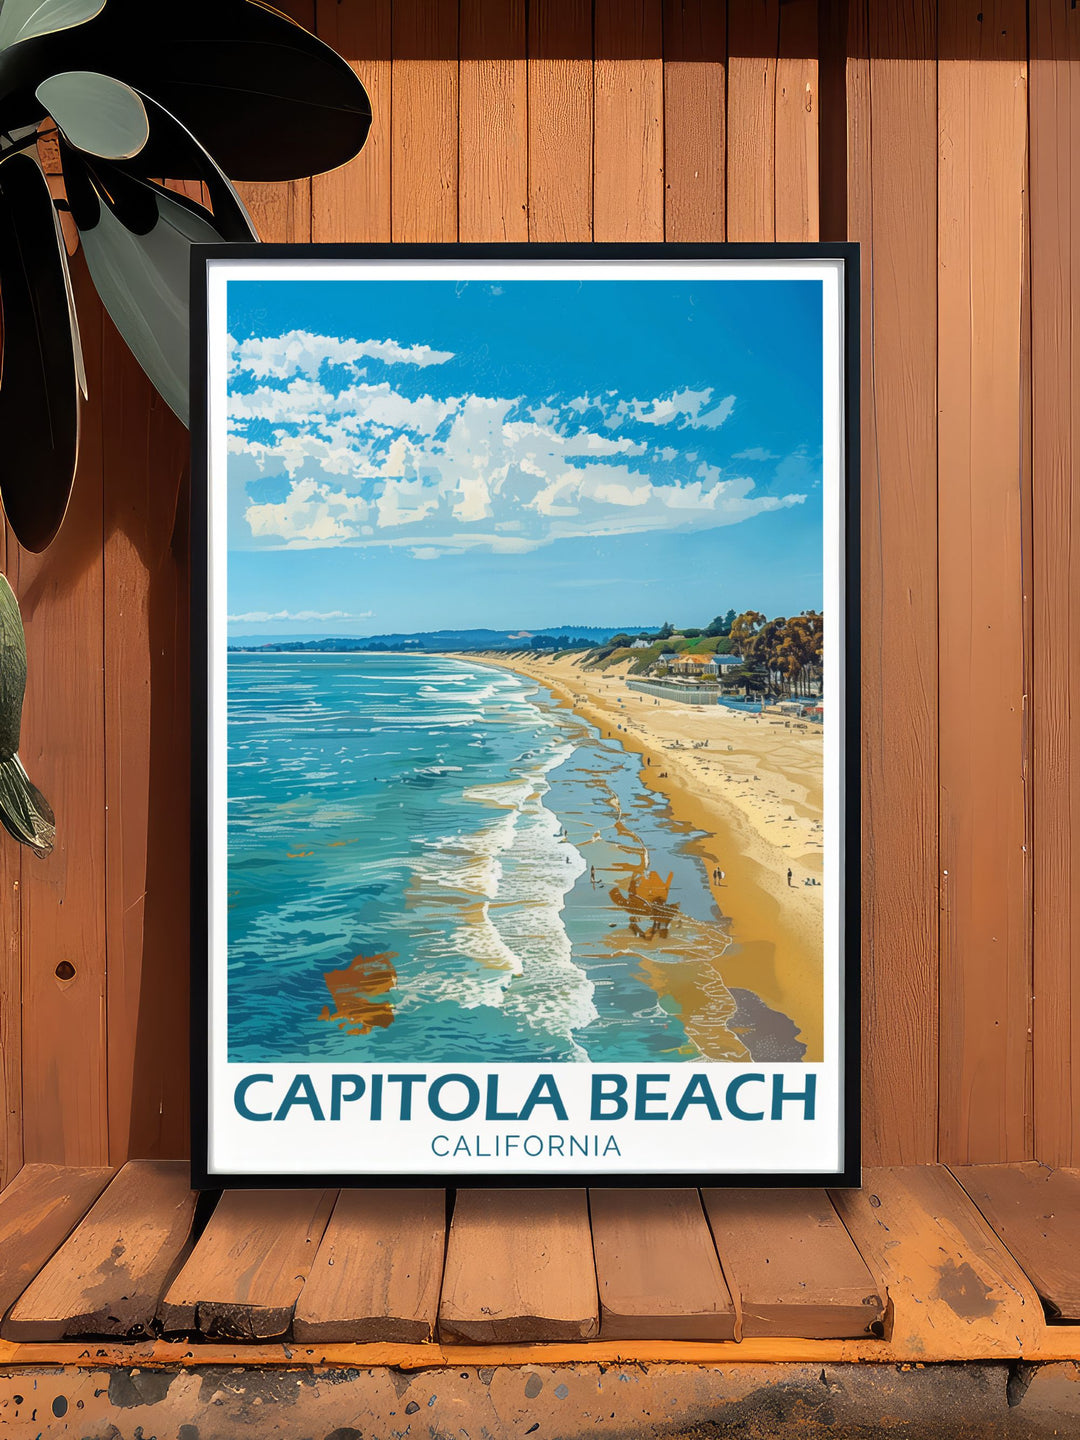 Vibrant Capitola Beach Travel Poster perfect for adding a pop of color and coastal charm to your home decor a wonderful gift idea for any occasion from birthdays to anniversaries appreciated by anyone who loves Californias beaches